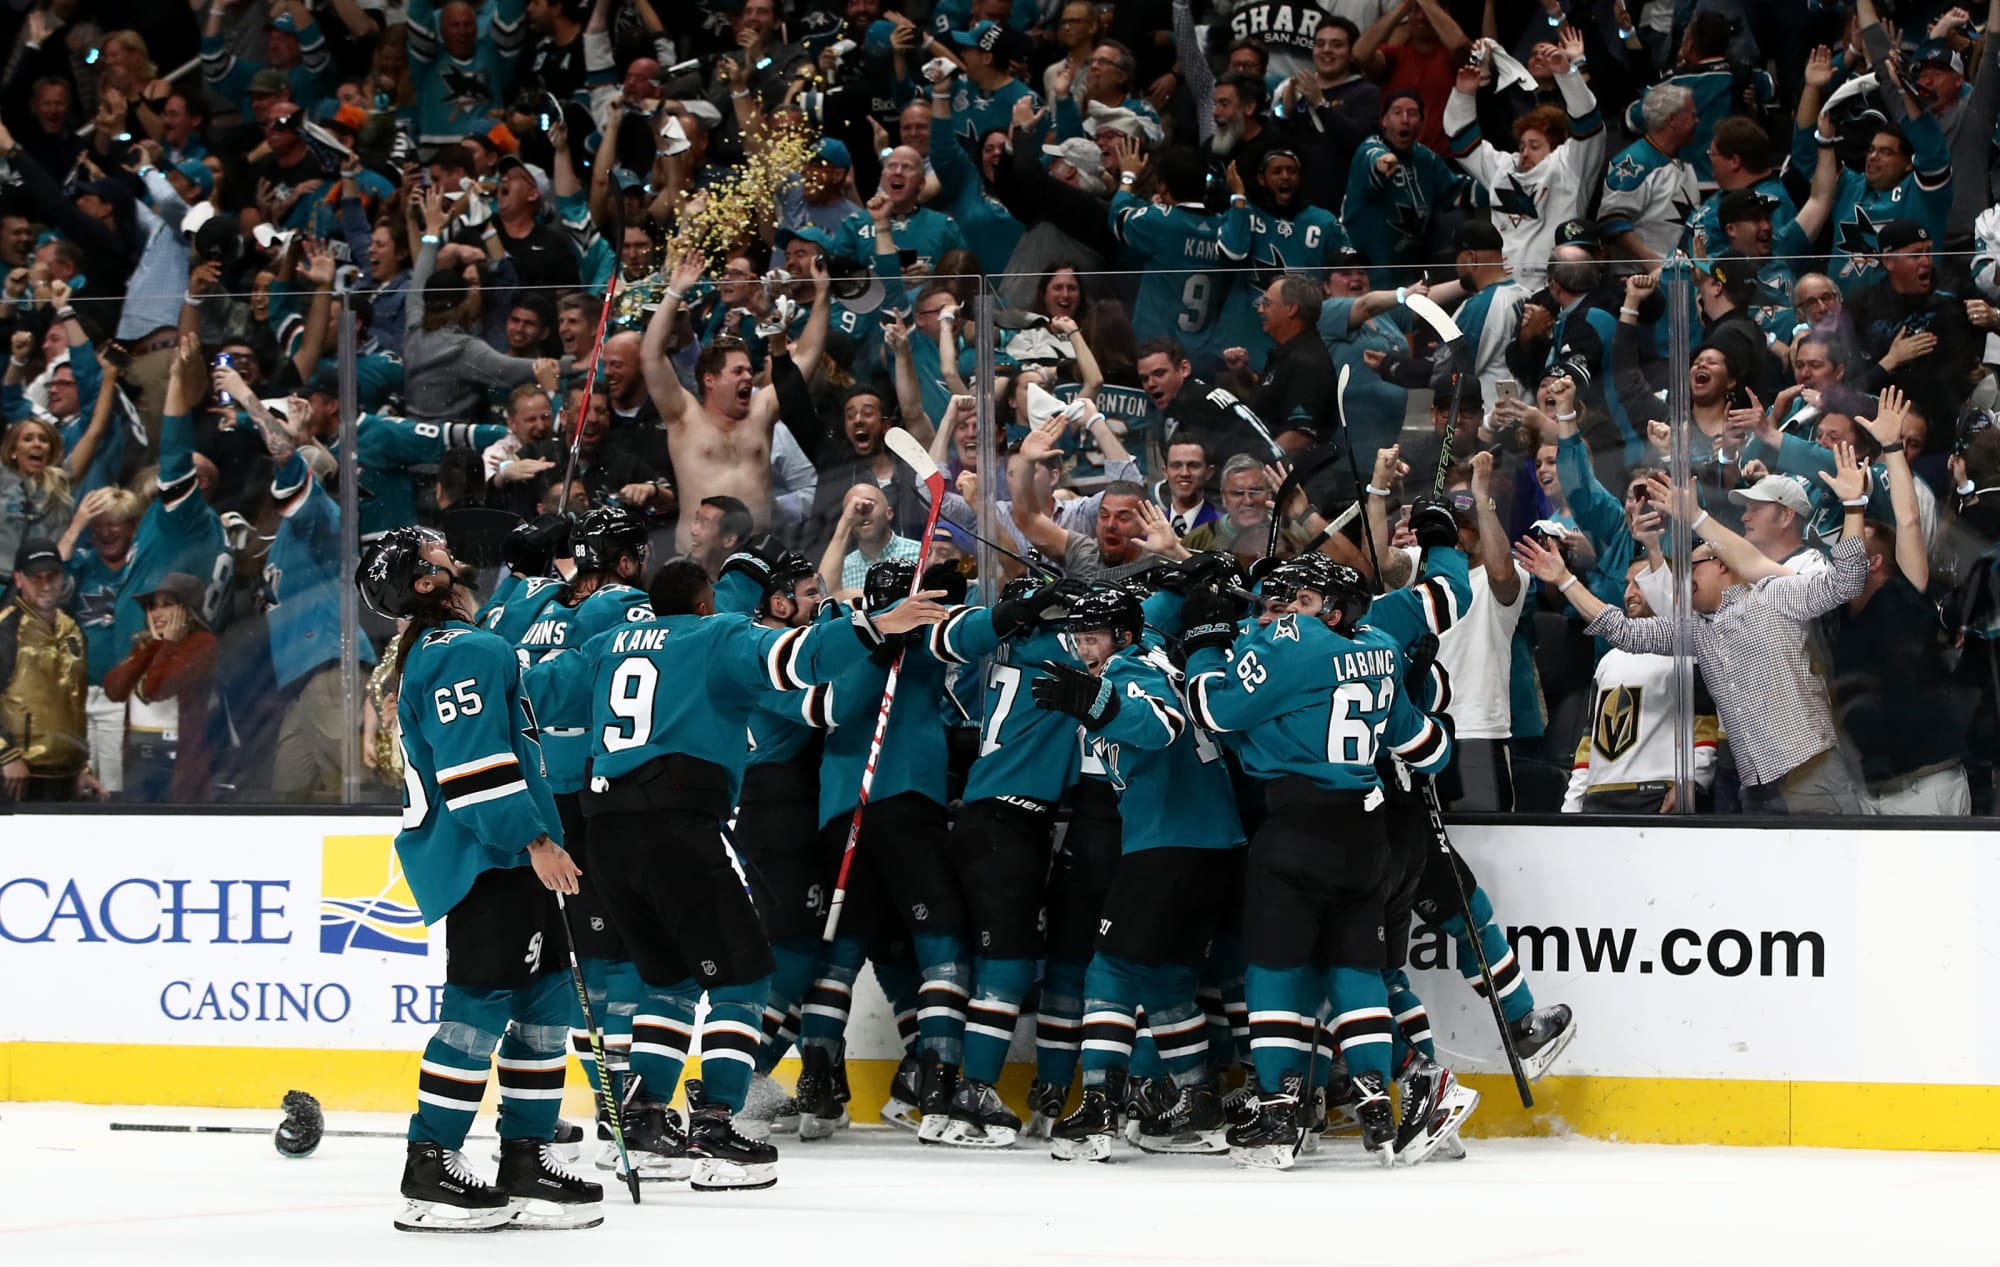 San Jose Sharks complete epic comeback to take series from Vegas